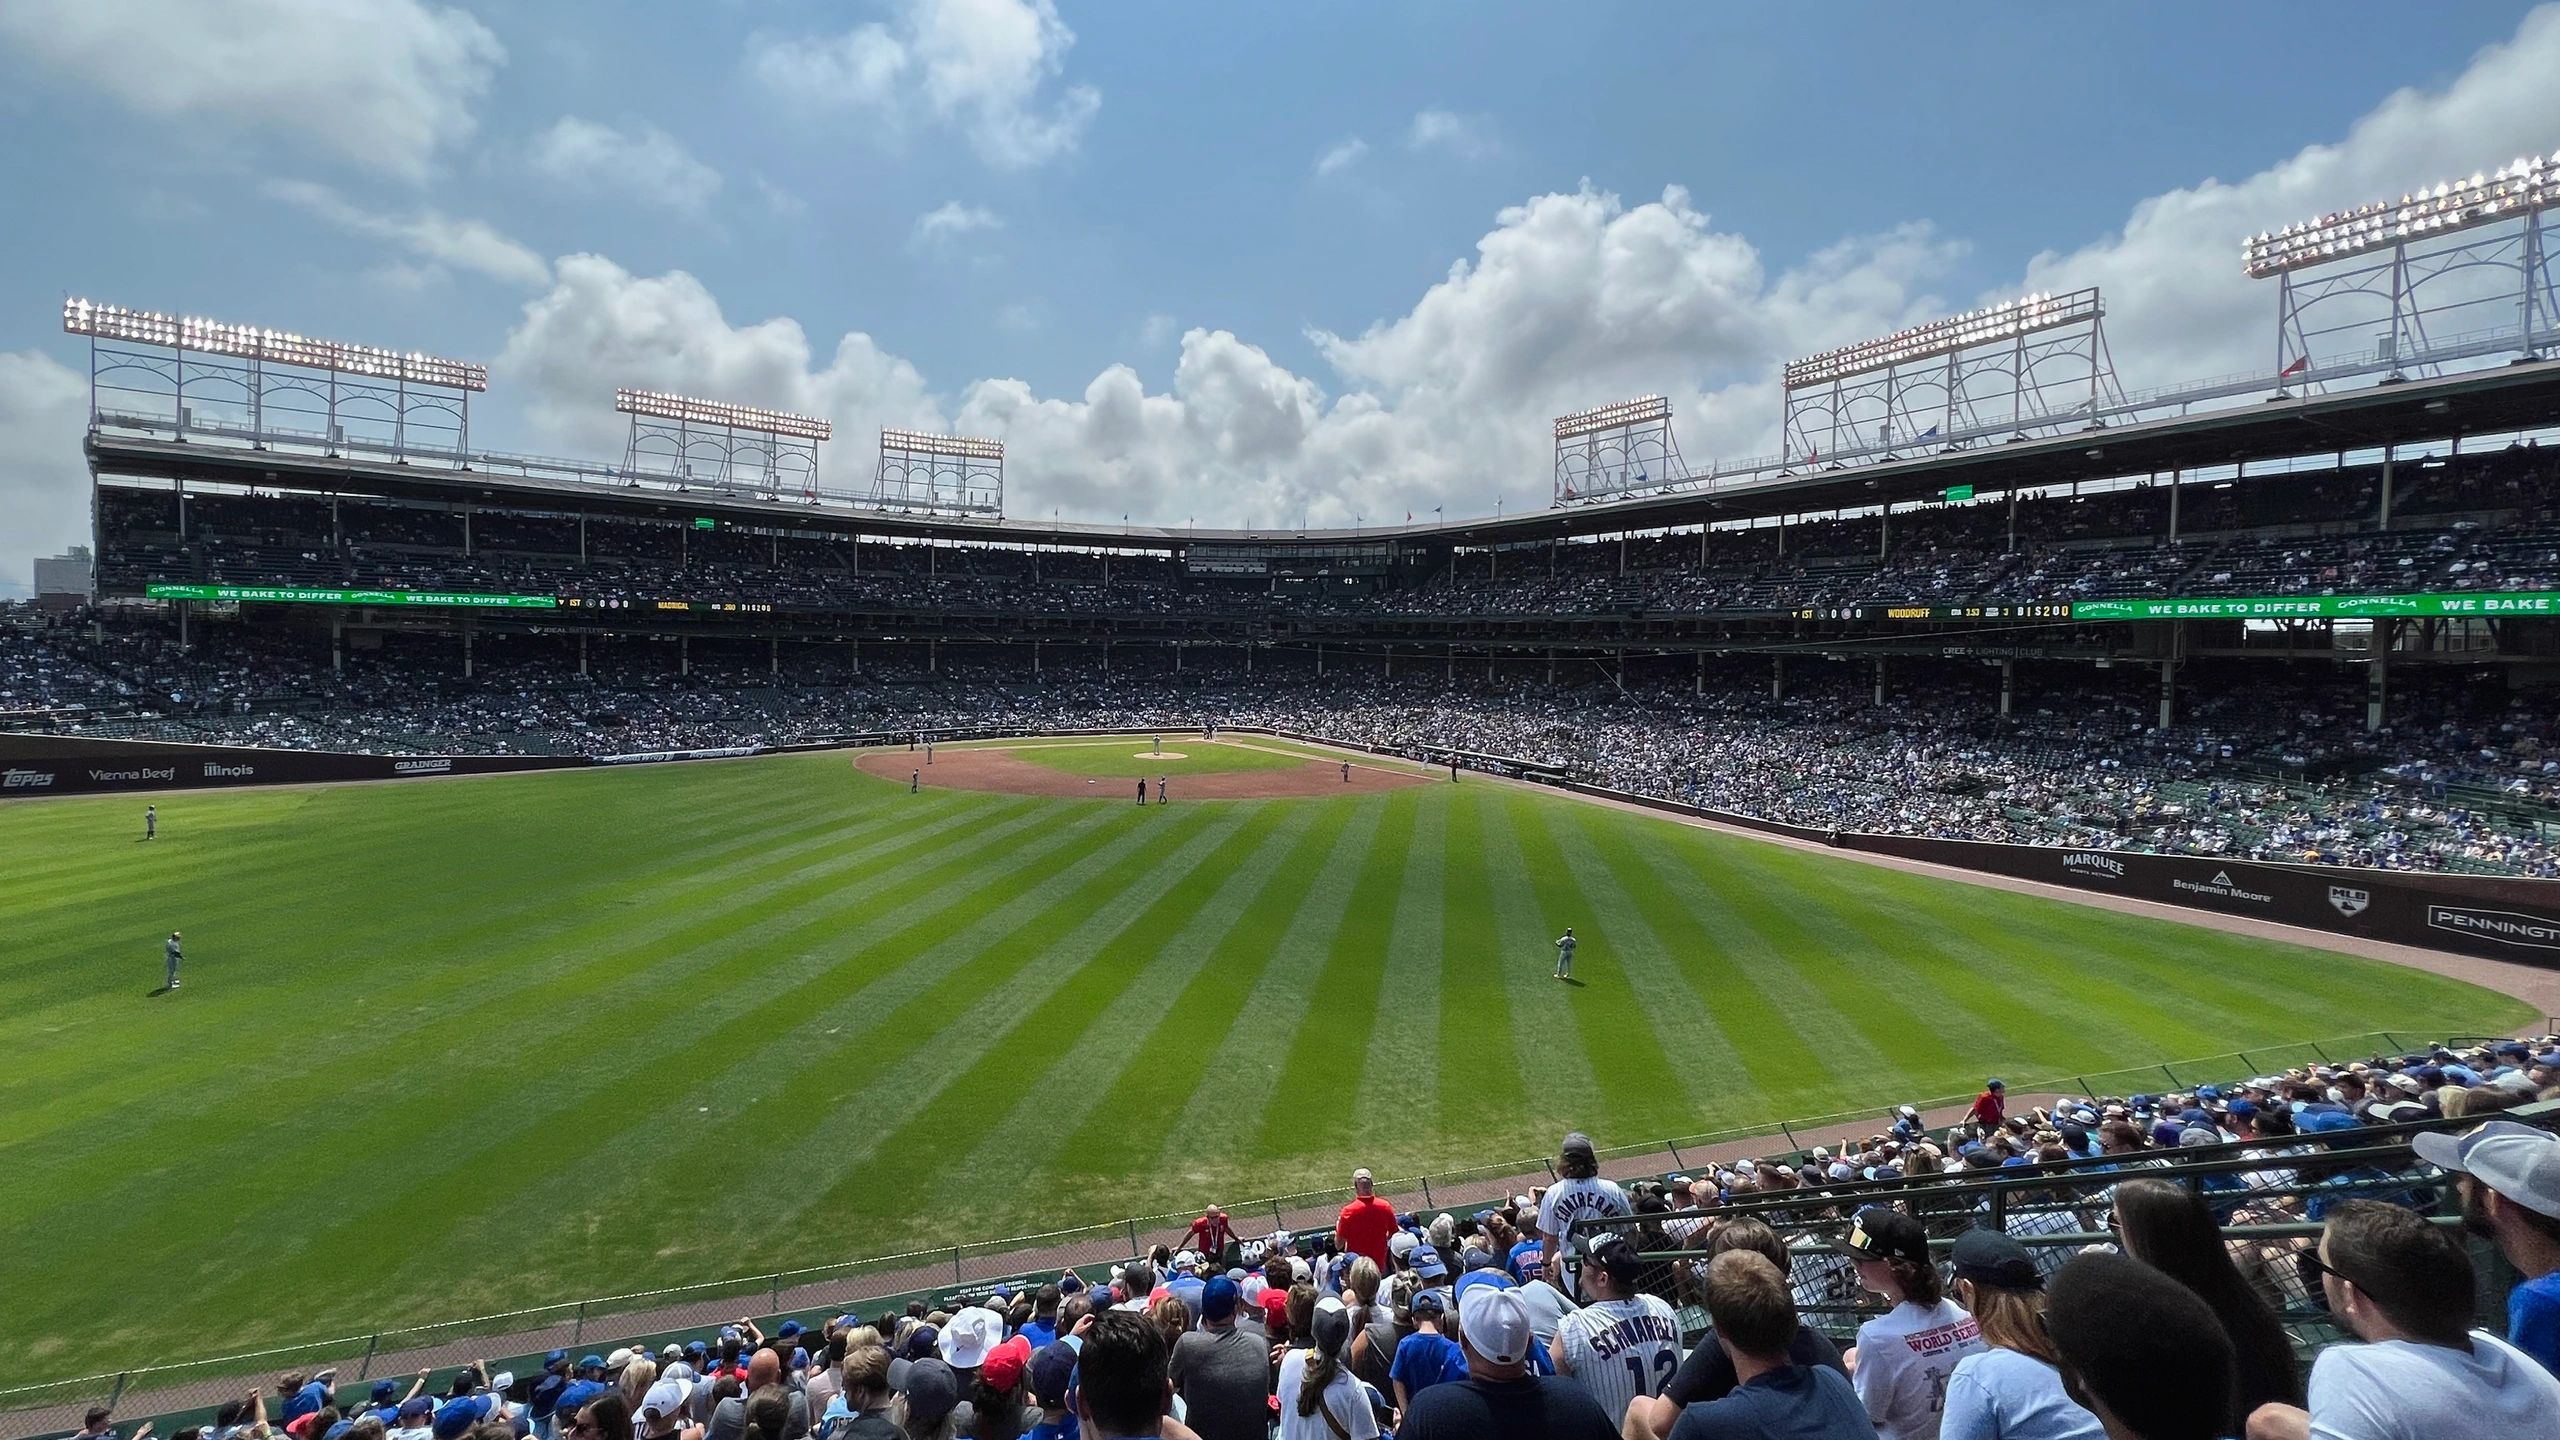 Recommendations & Links - 2022 CHICAGO CUBS EARLY ENTRY BLEACHER TICKETS